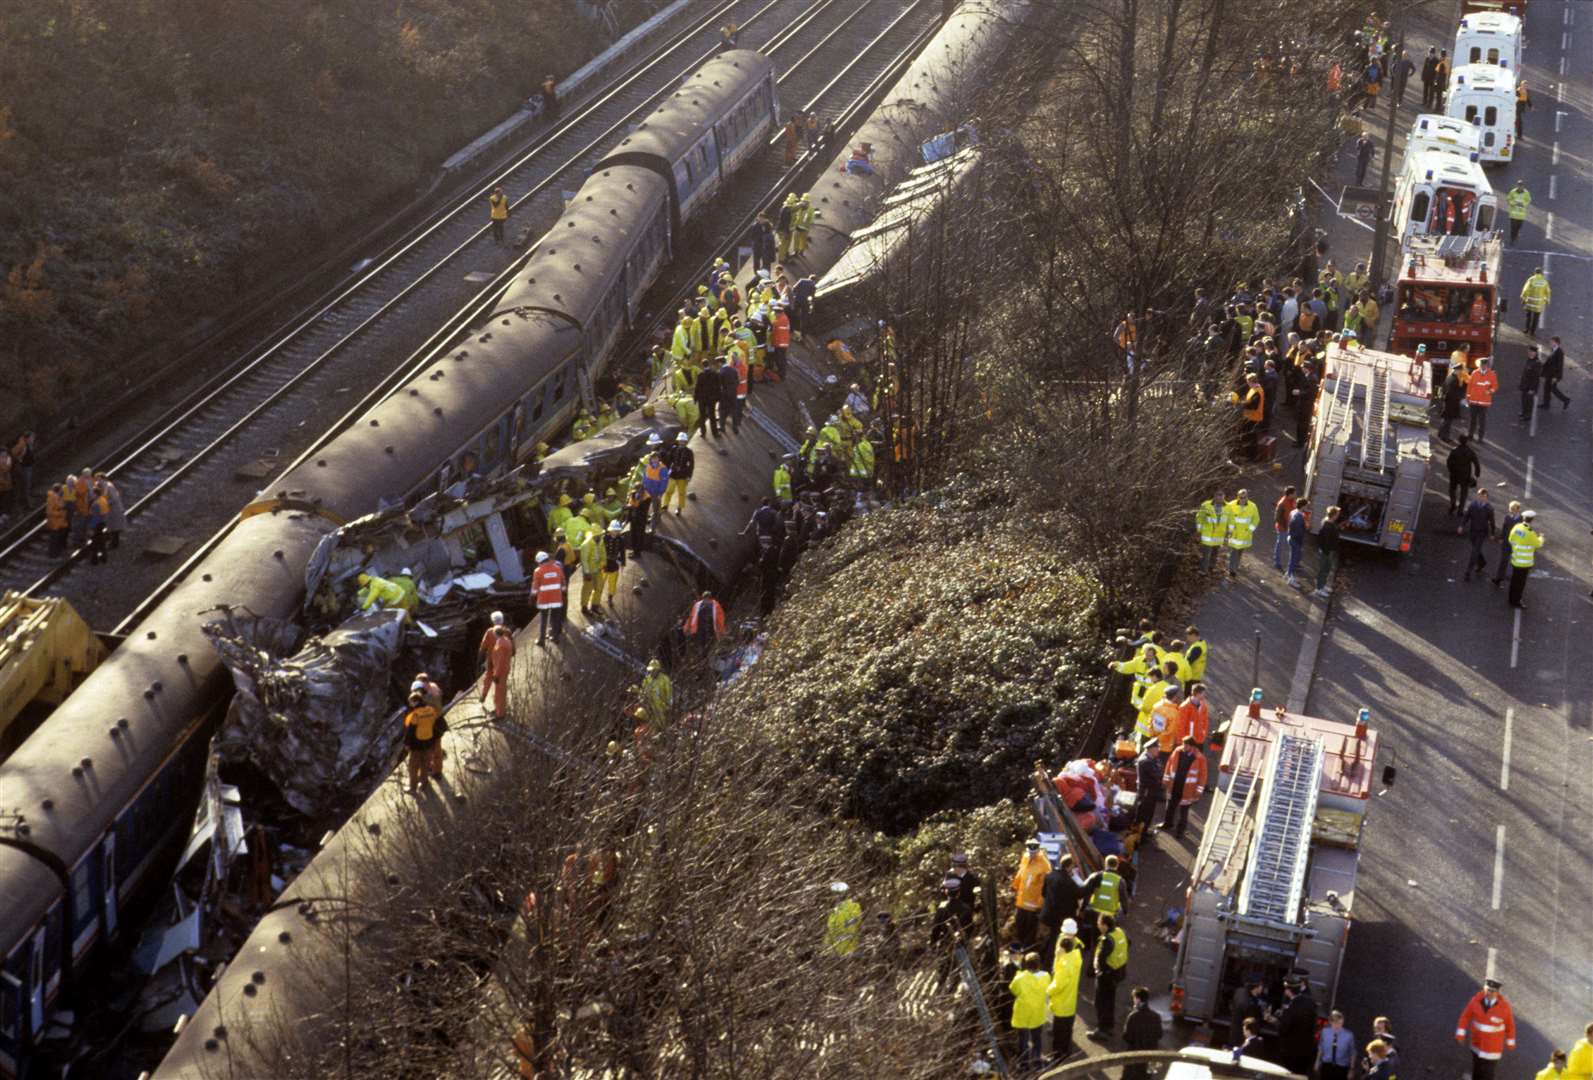 Rescue workers clamber over the wreckage of three trains that crashed near Clapham Junction in December 1988 (PA)